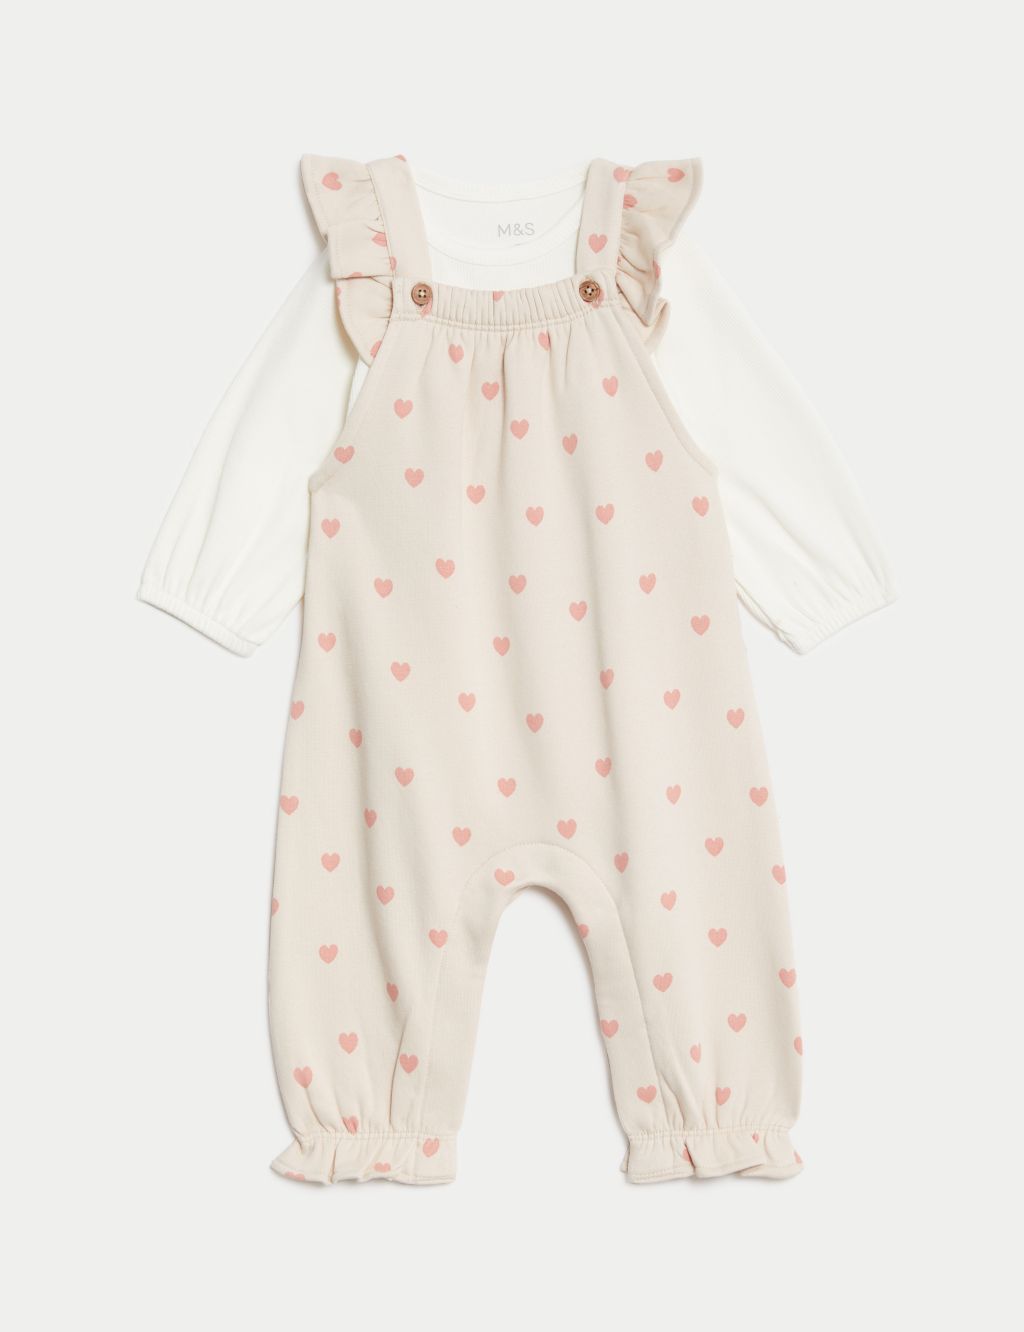 2pc Cotton Rich Heart Print Outfit (0-3 Yrs) image 2